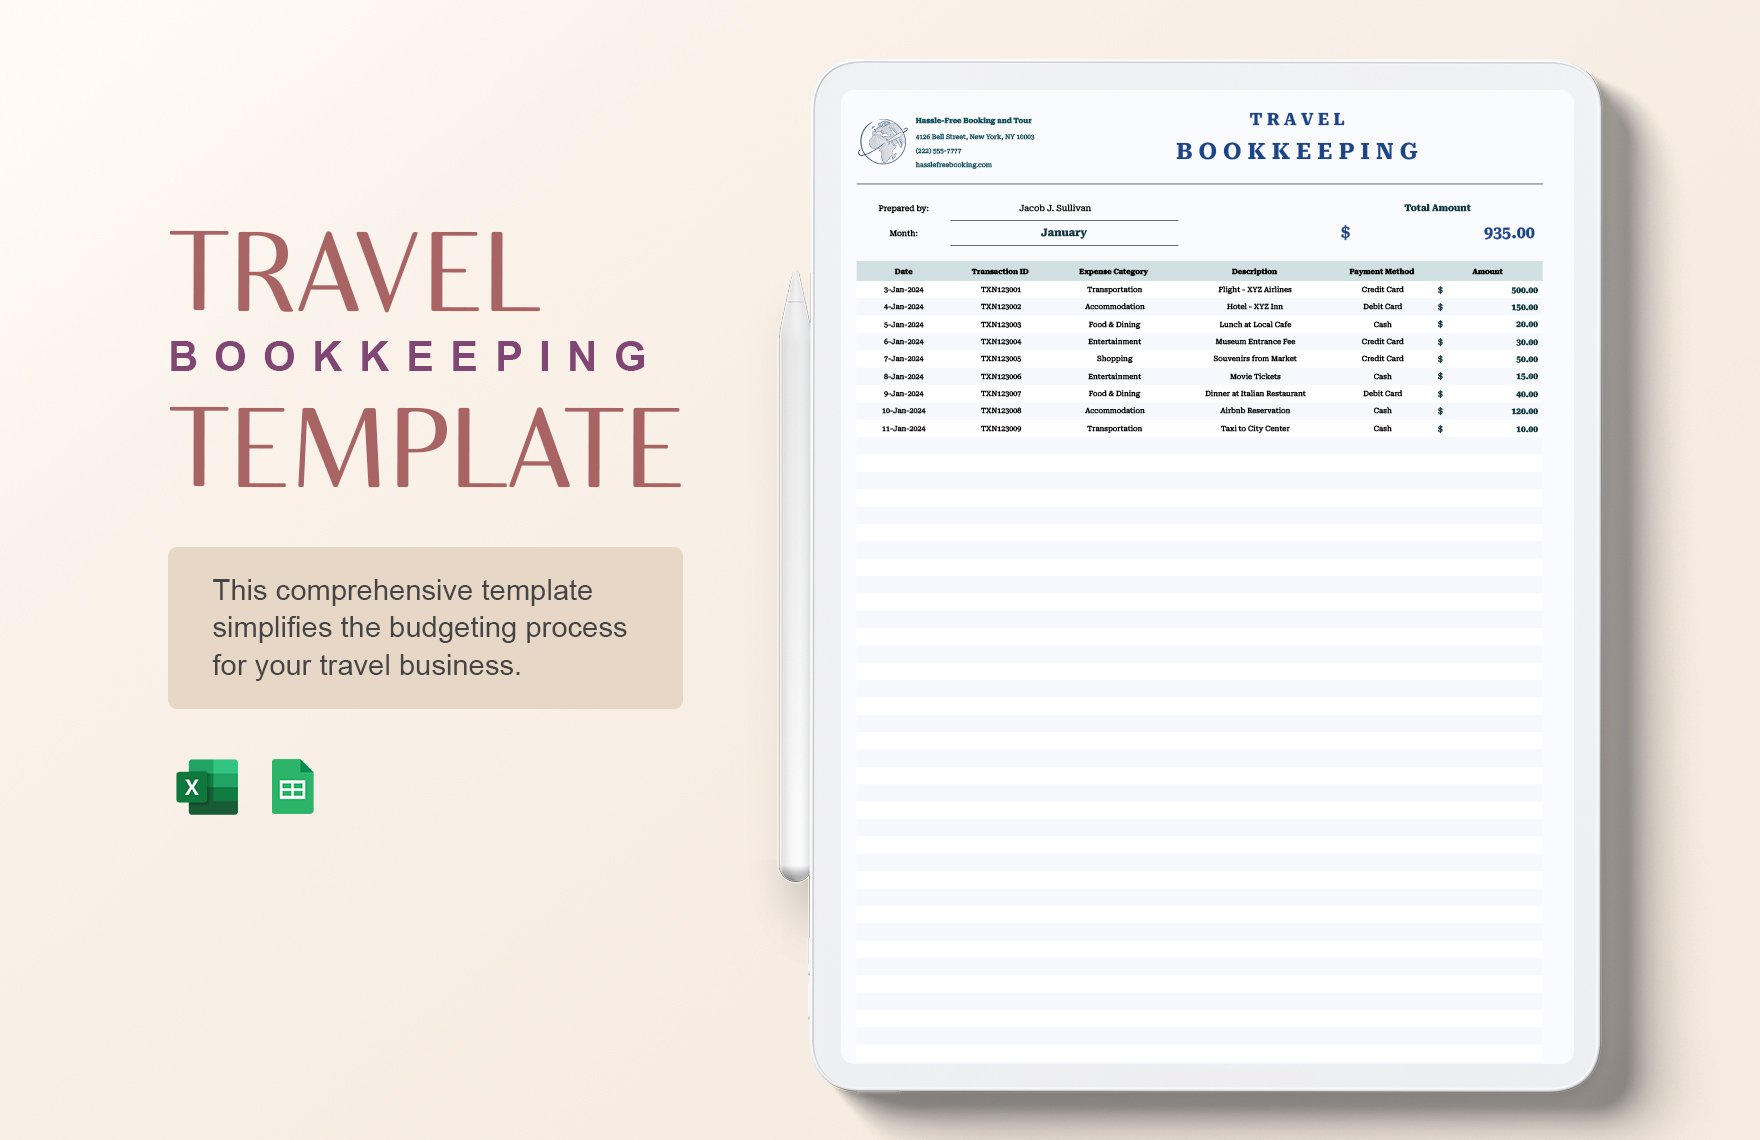 Travel Bookkeeping Template in Excel, Google Sheets